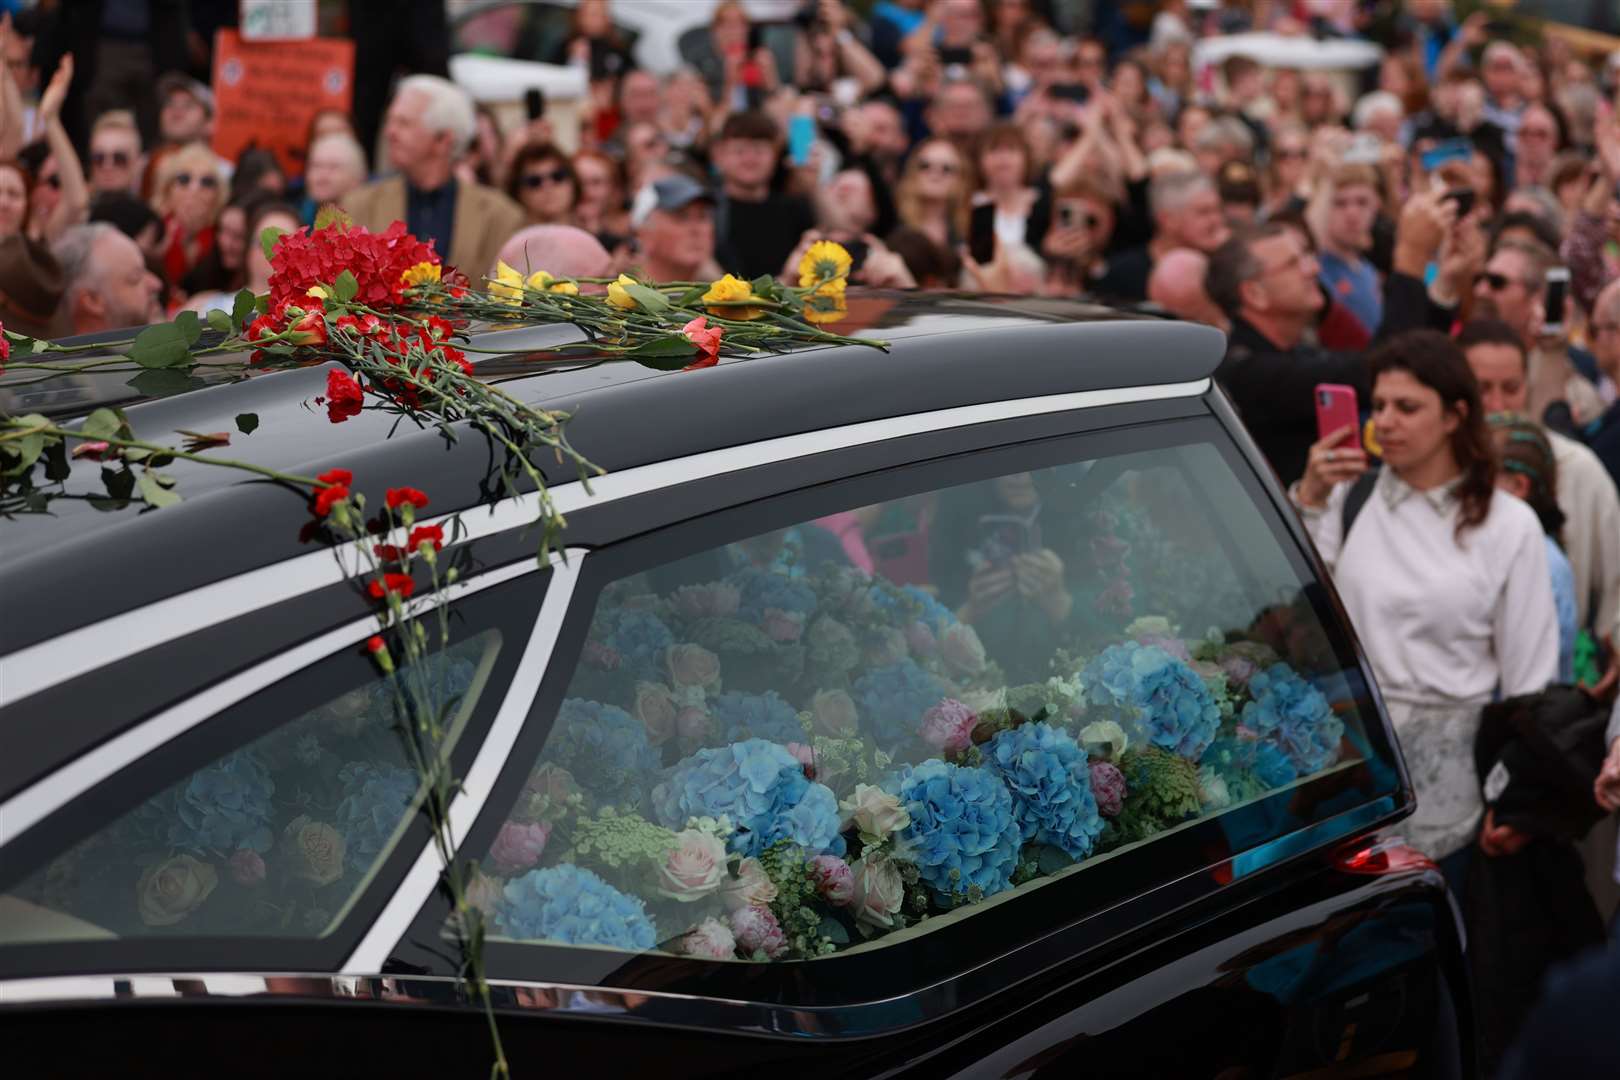 Flowers were thrown at the hearse as it passed by (Liam McBurney/PA)